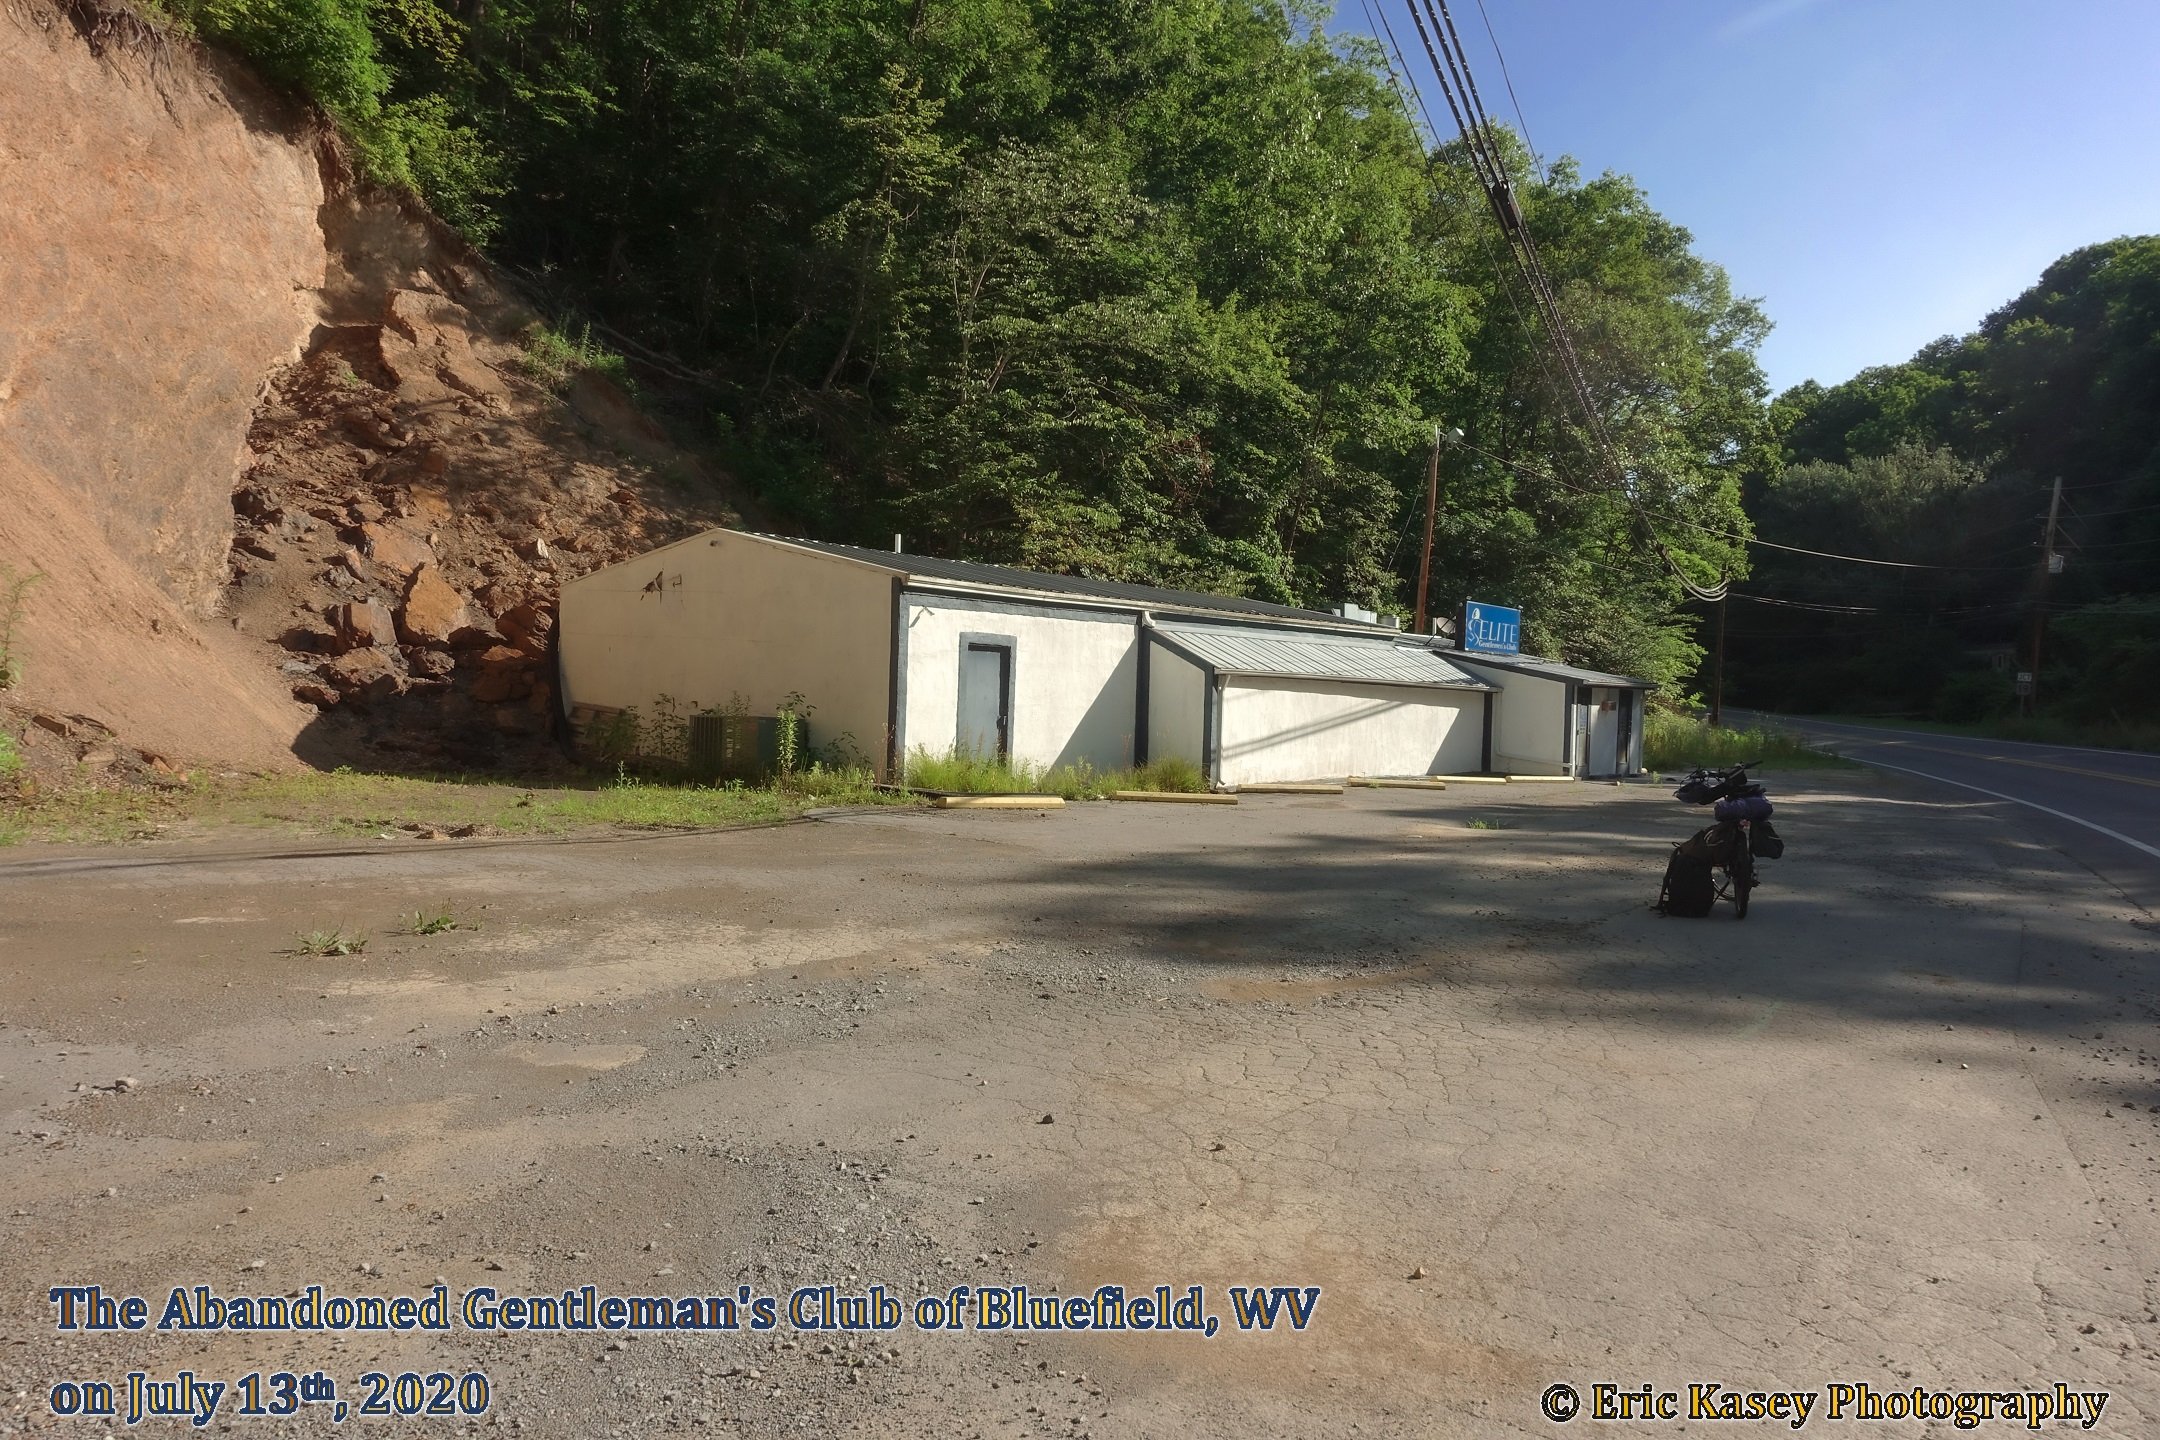 9 - The Abandoned Gentleman's Club of Bluefield, WV on July 13th, 2020.JPG